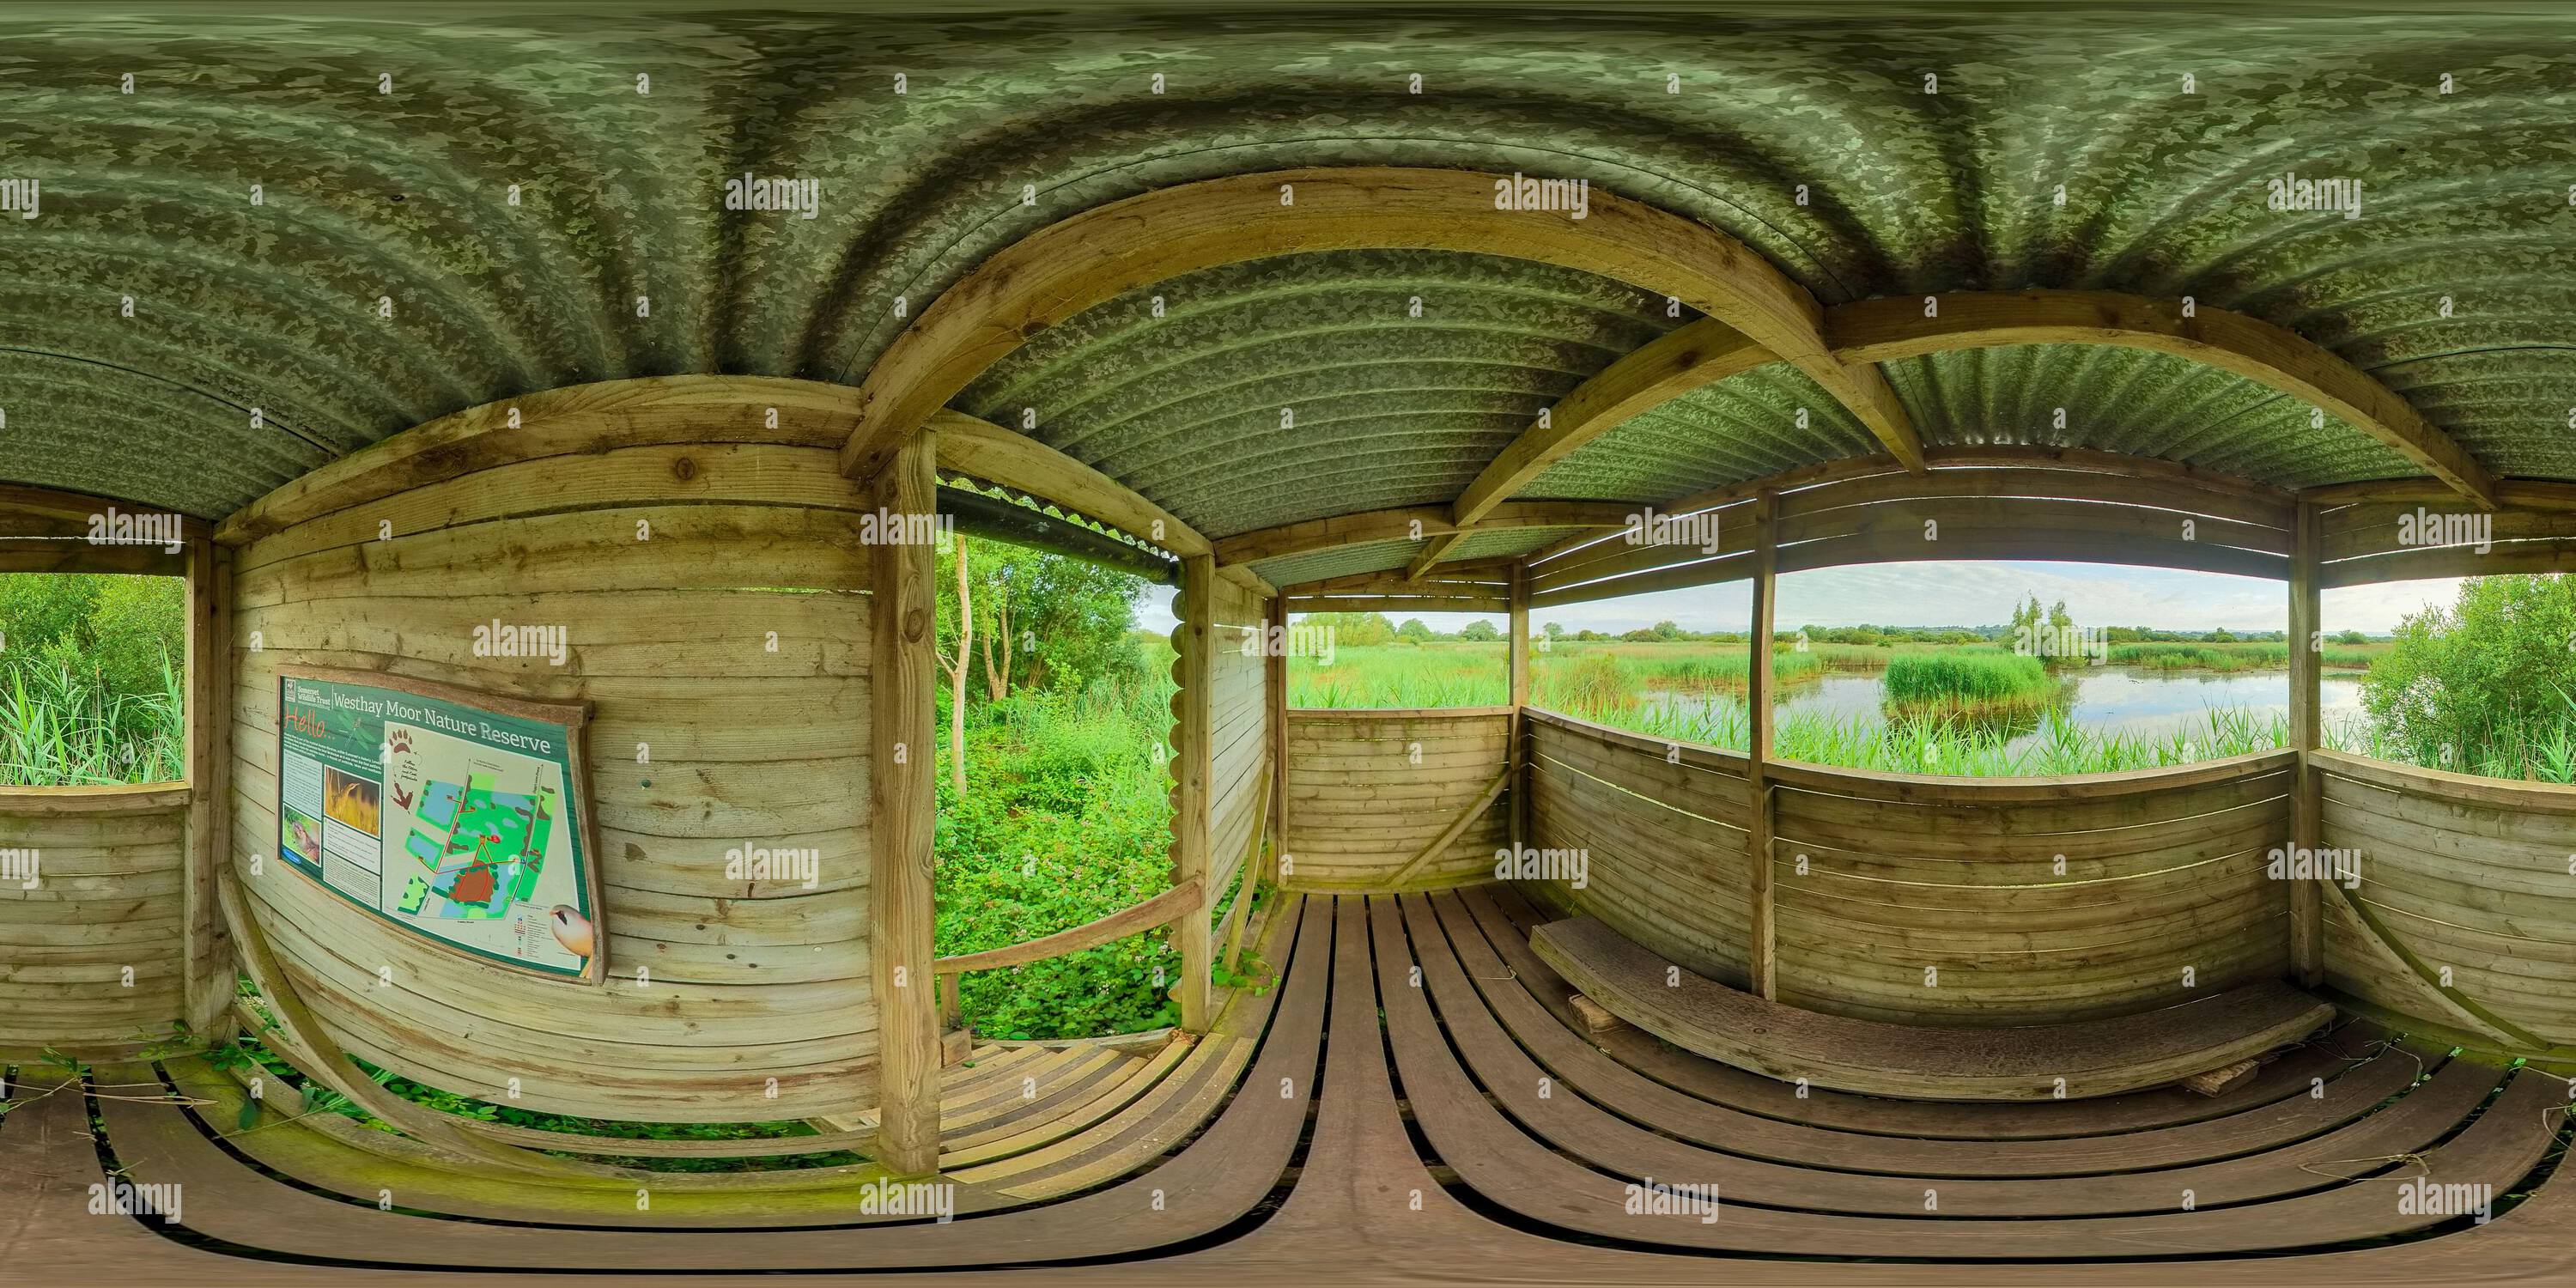 360 degree panoramic view of 30 Acre Hide Interior Right Side at Westhay Moor National Nature Reserve